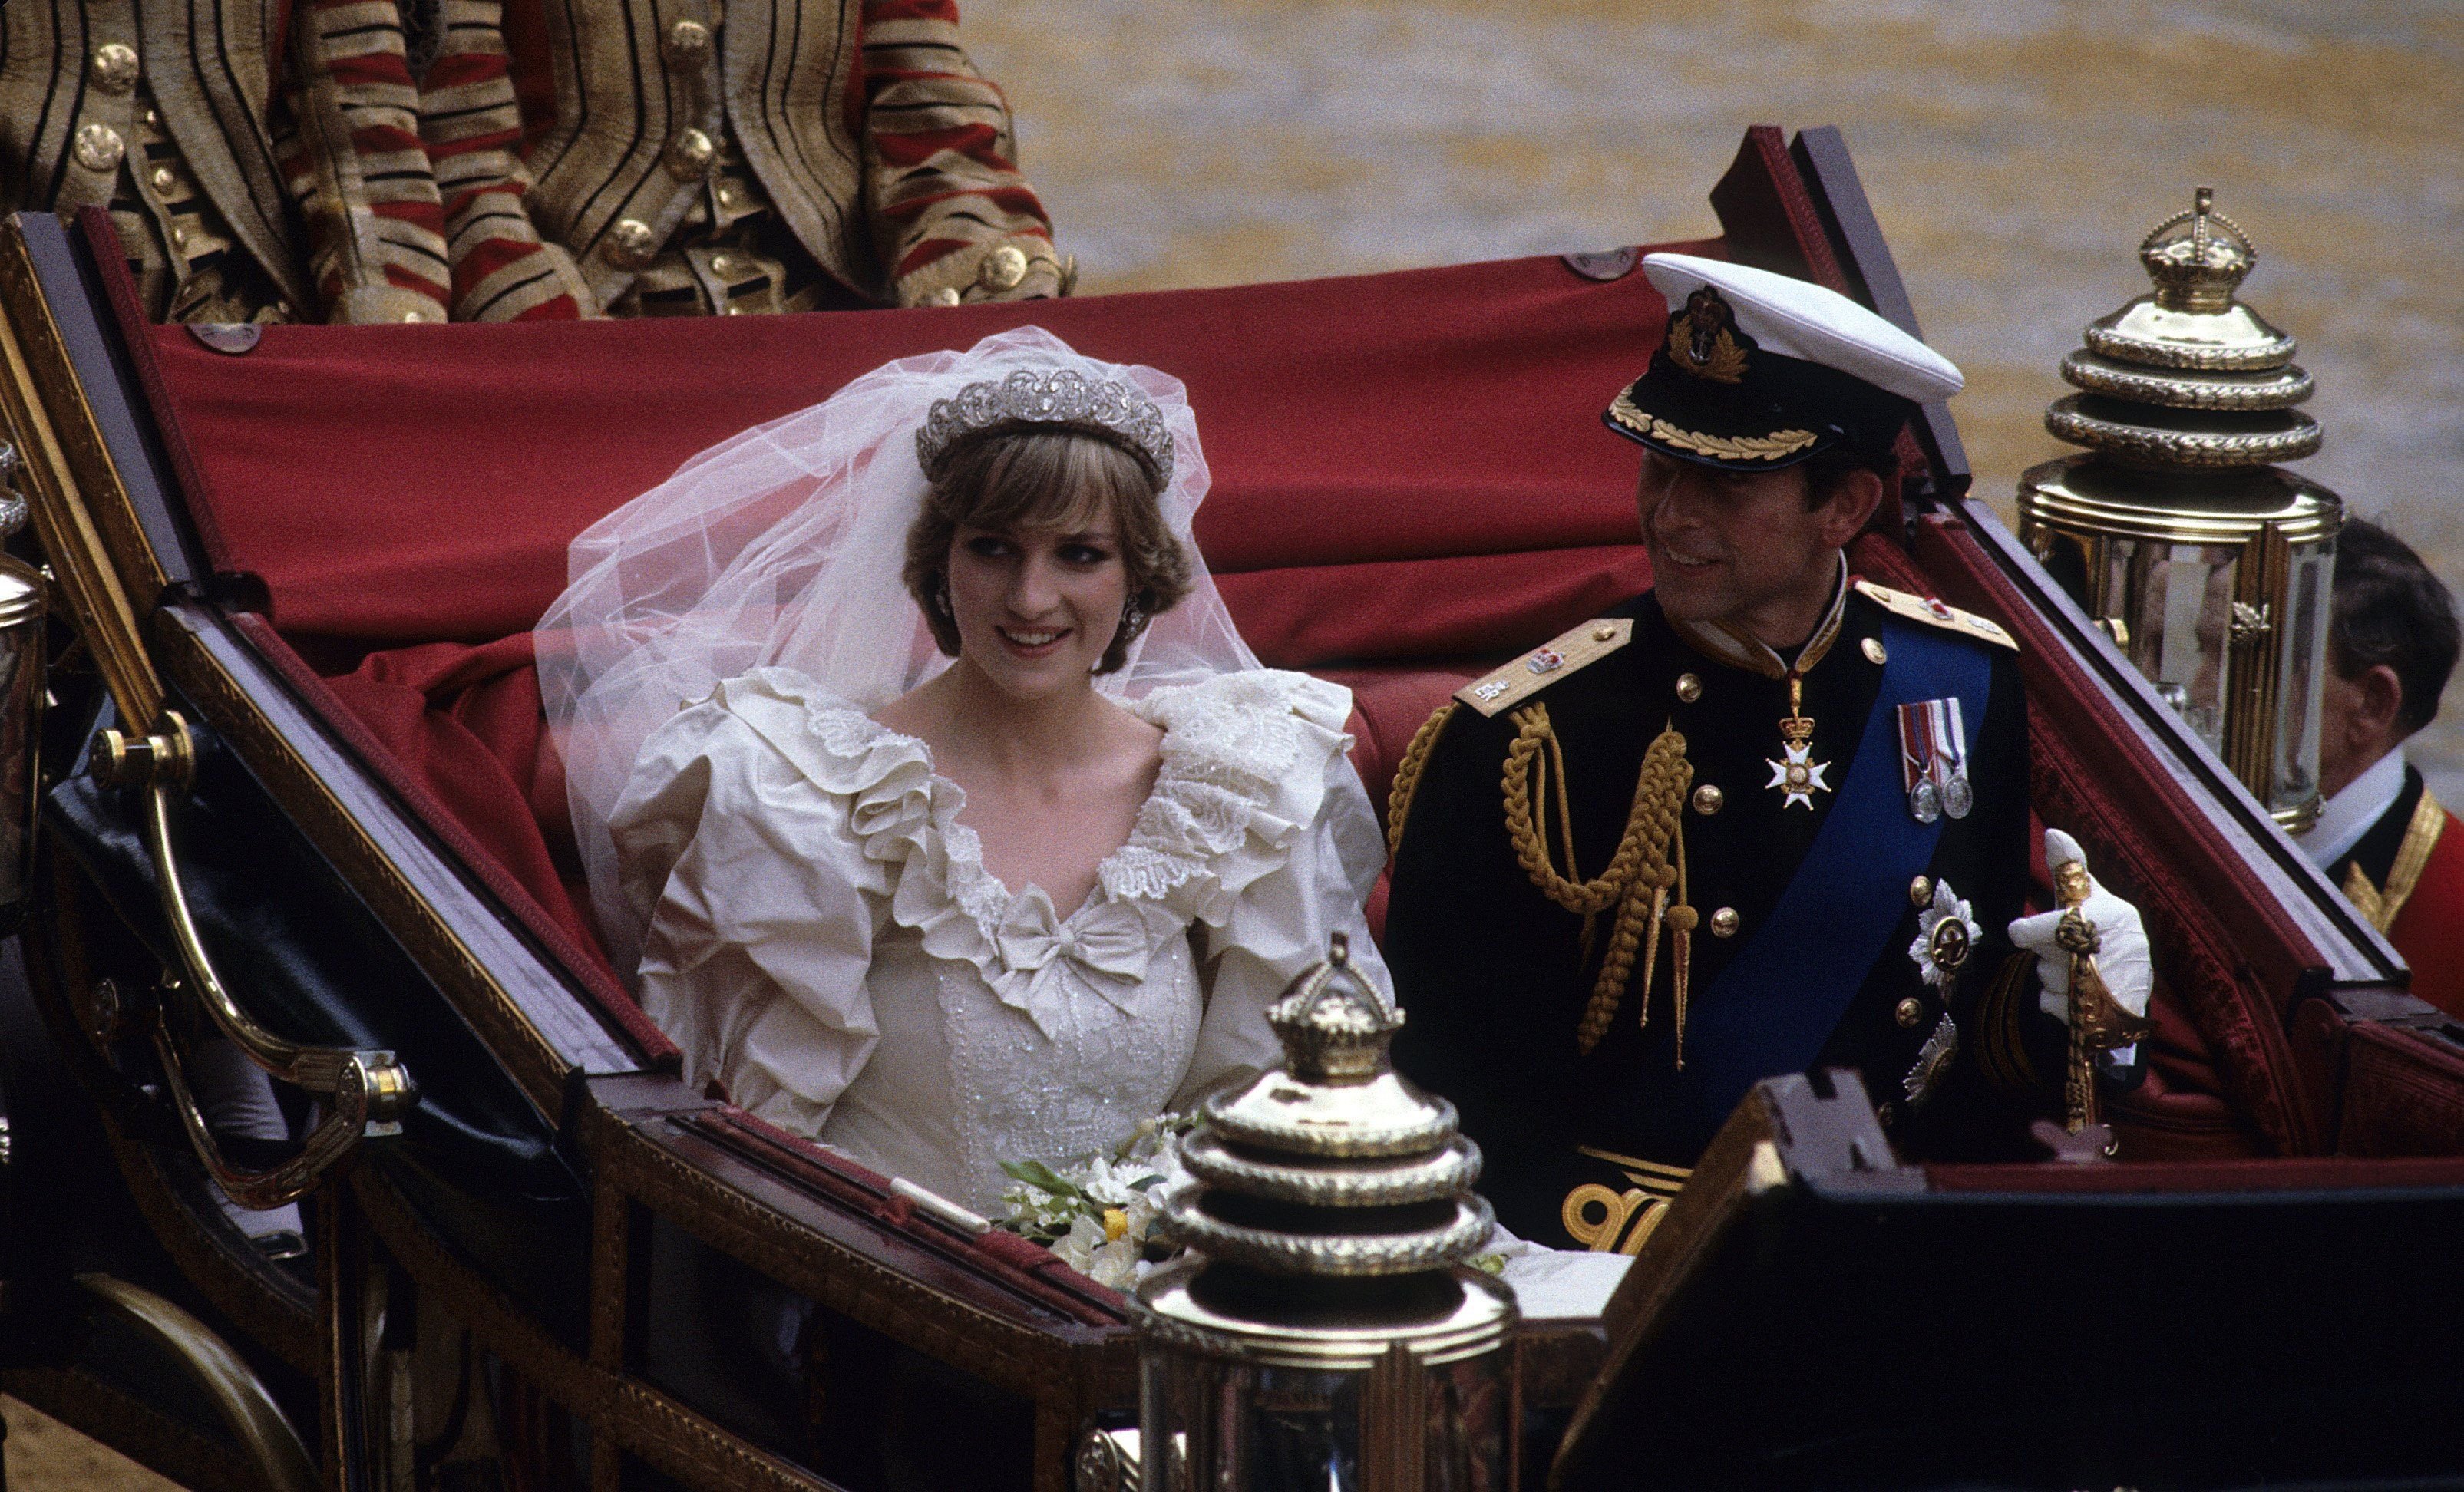 Prince Charles and Princess Diana rode in an open carriage, from St. Paul's Cathedral to Buckingham Palace, following their wedding on July 29, 1981 | Photo: Getty Images